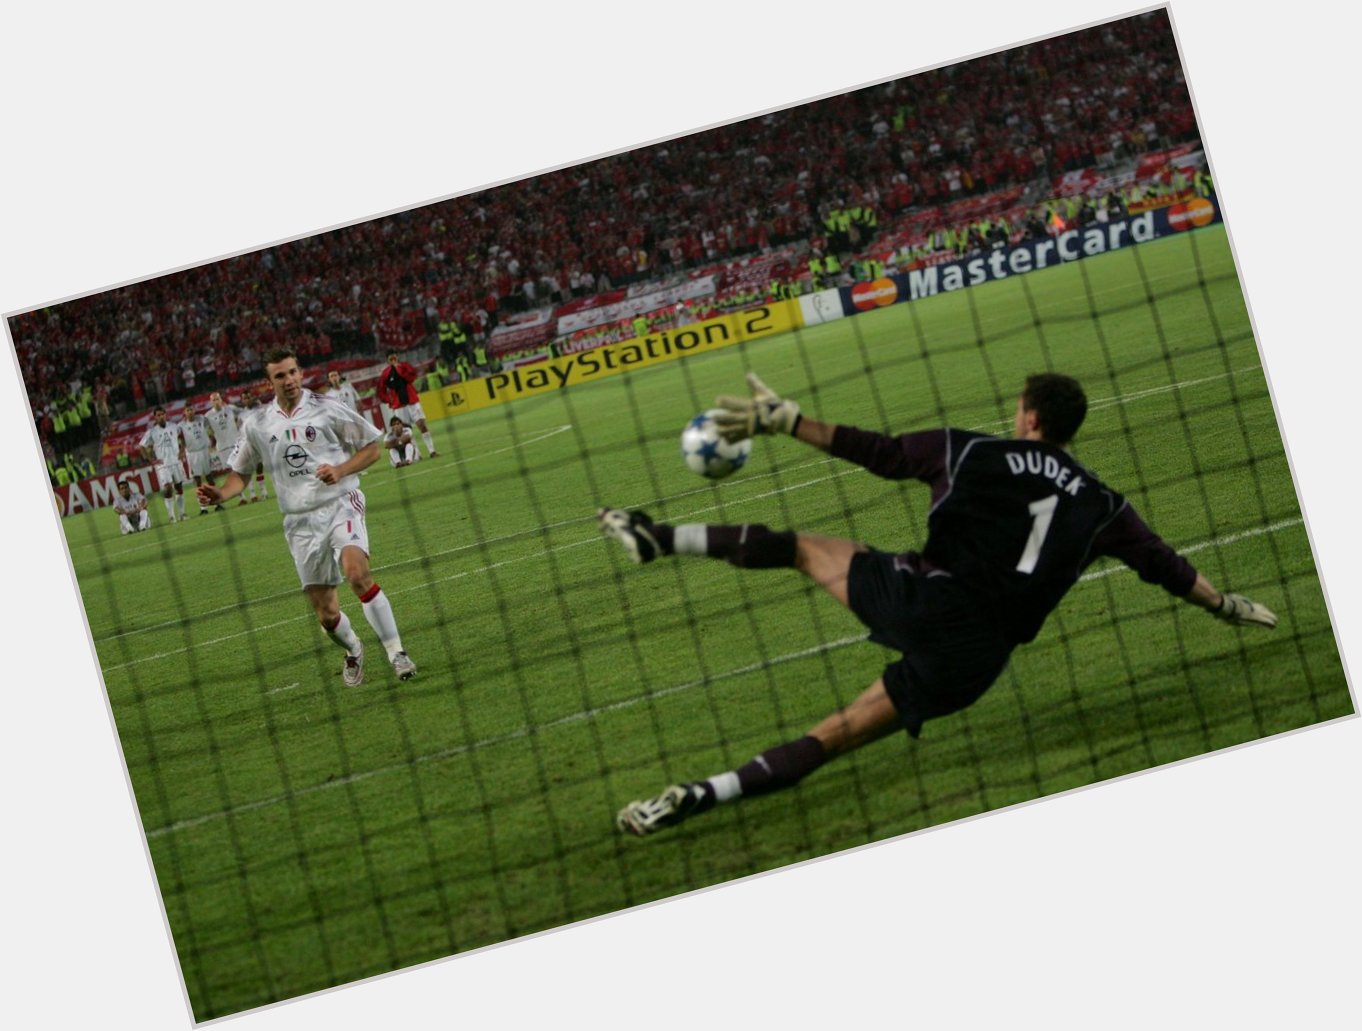 Happy Birthday to Jerzy Dudek, the man Liverpool fans will love forever! 